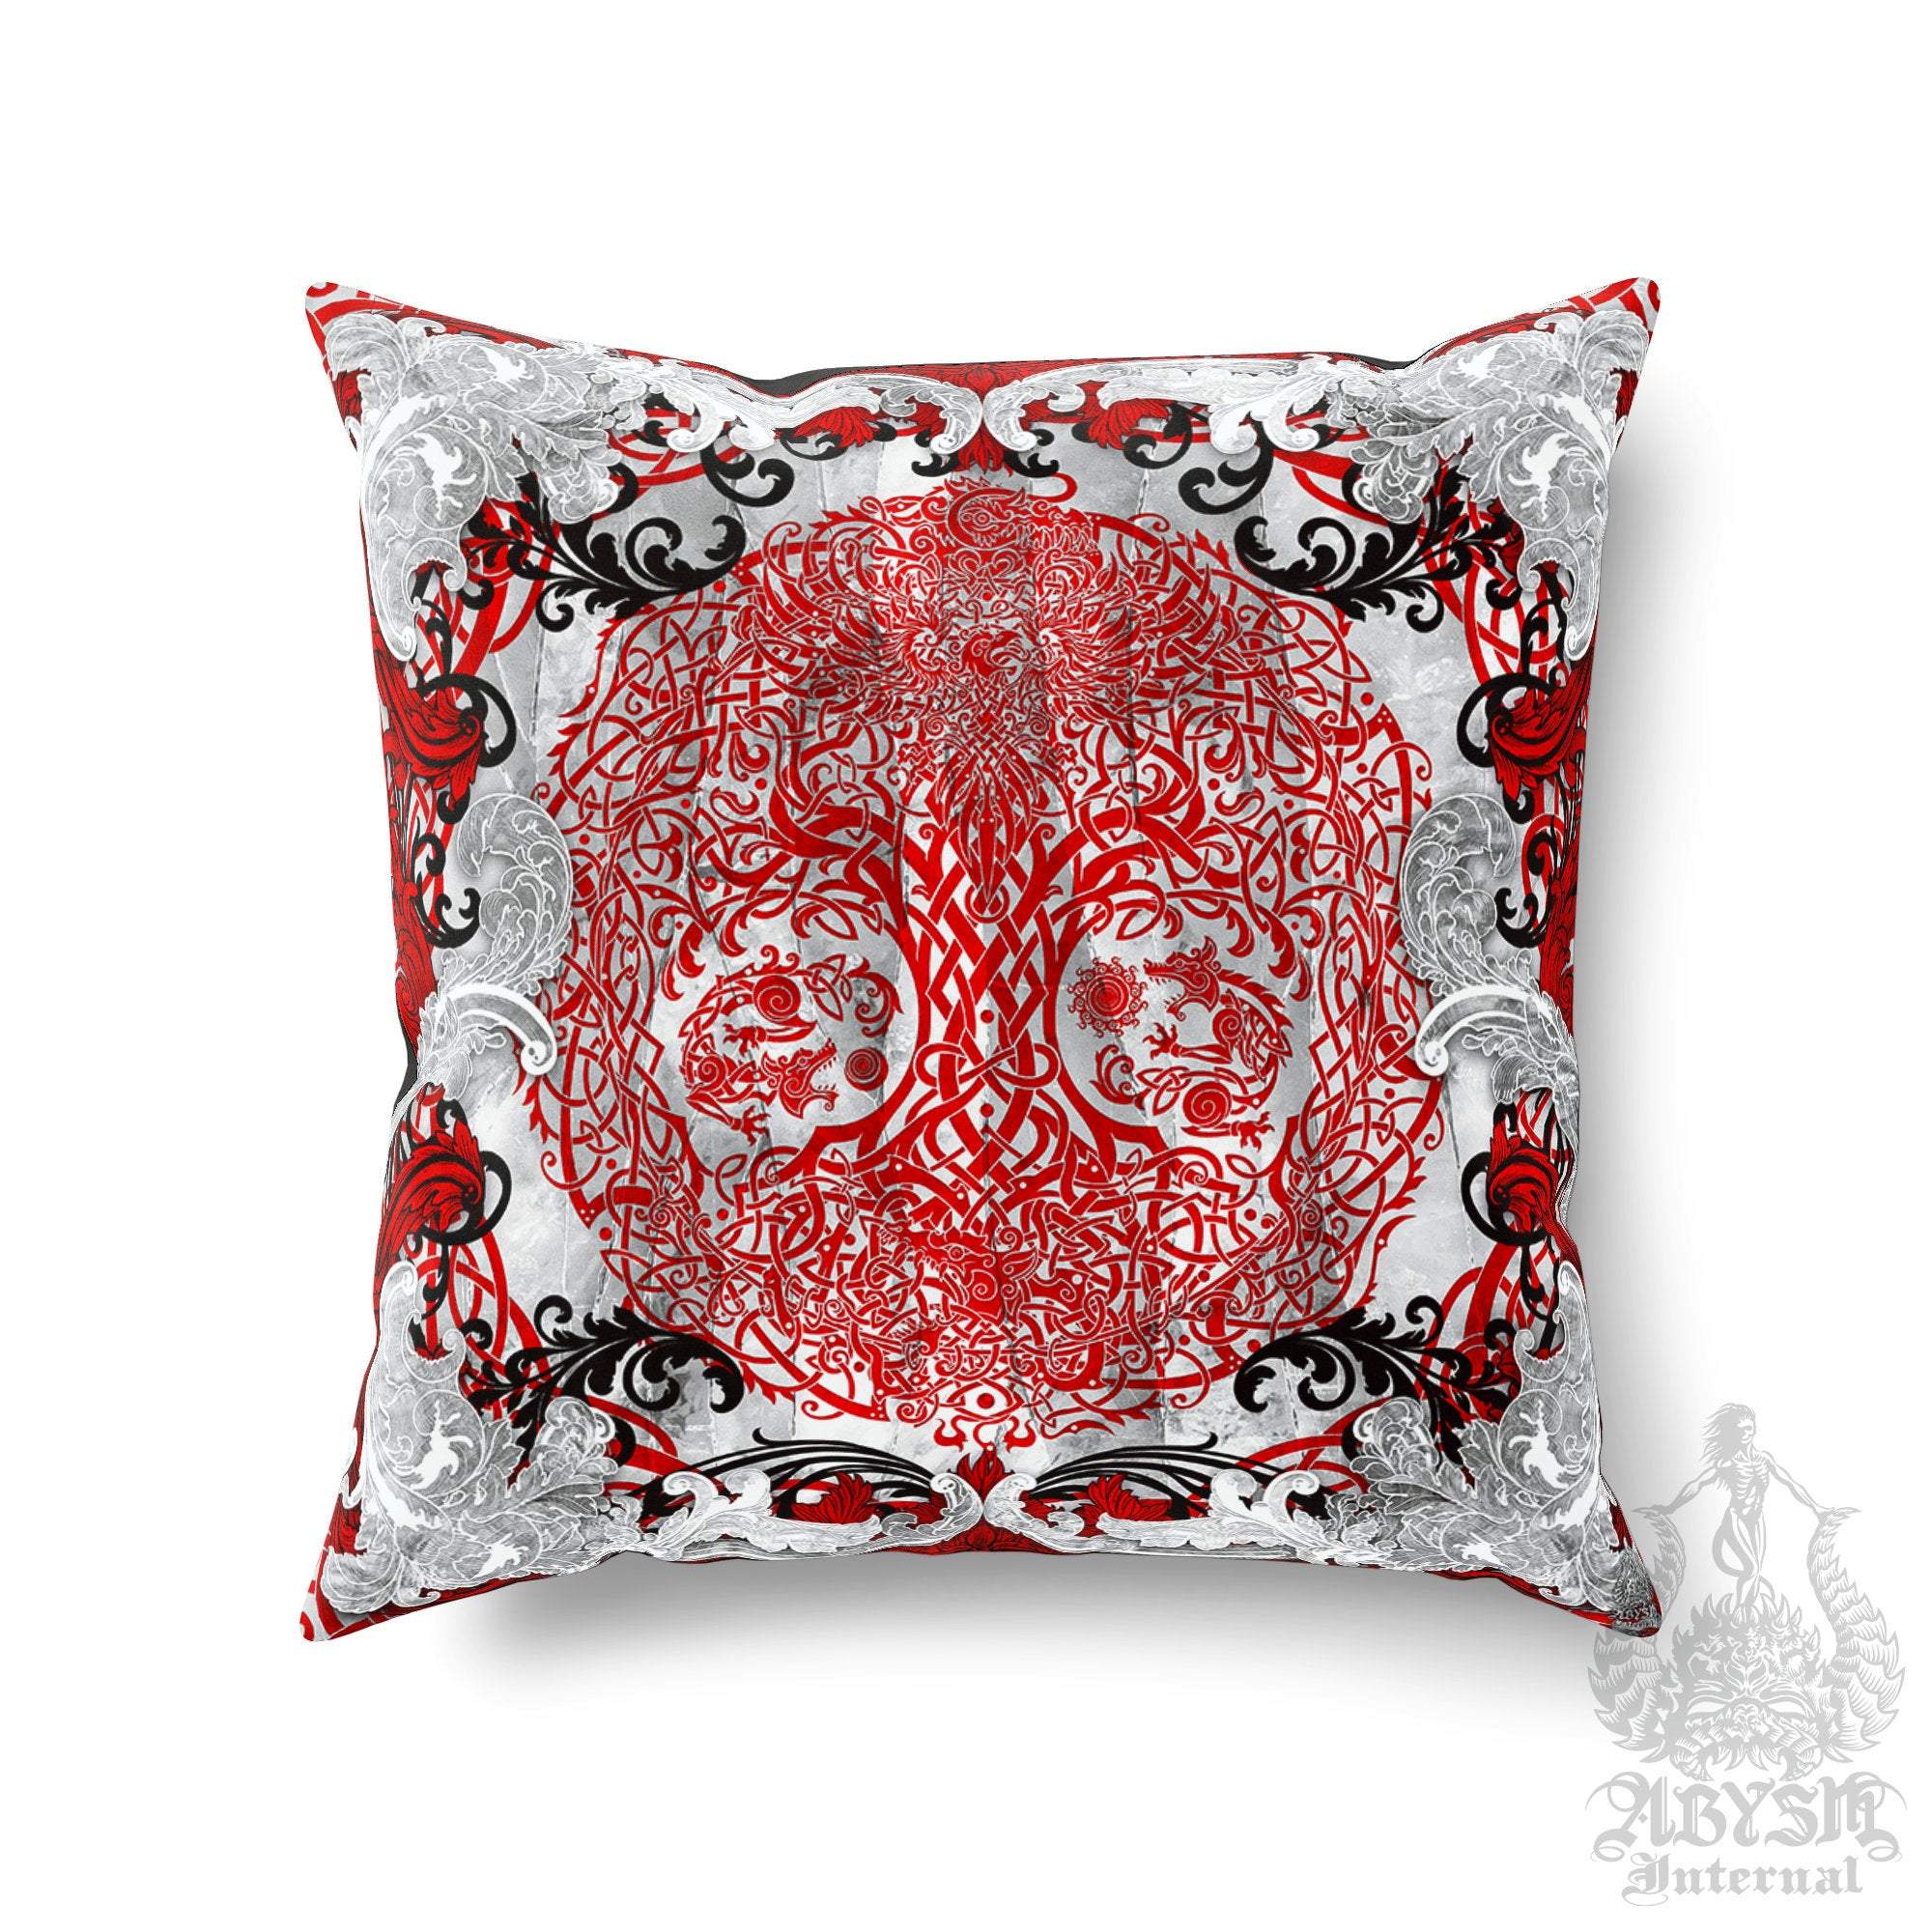 Viking Throw Pillow, Decorative Accent Cushion, Yggdrasil, Goth Room Decor, Nordic Art, Alternative Home - Tree of Life, Bloody White - Abysm Internal